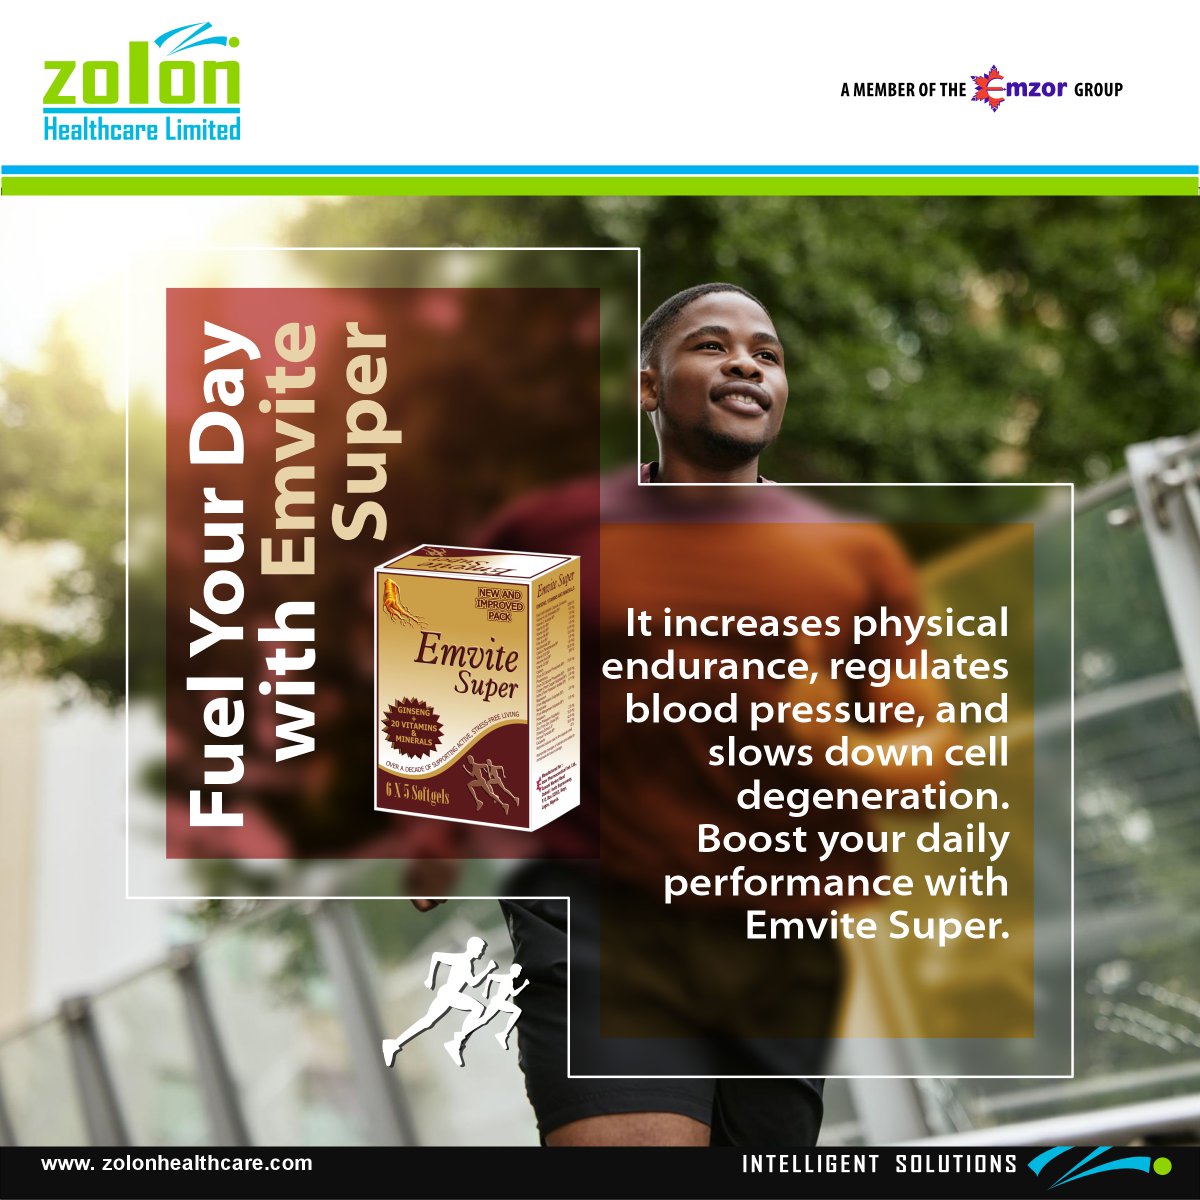 Unleash your inner strength with Emvite Super, the ultimate supplement for power and vitality! 💪
Are you ready to take your strength to the next level? 
Emvite Super is here to help you reach and surpass your limits!

#EmviteSuper #UnleashYourPower #PowerWithin #zolonhealthcare